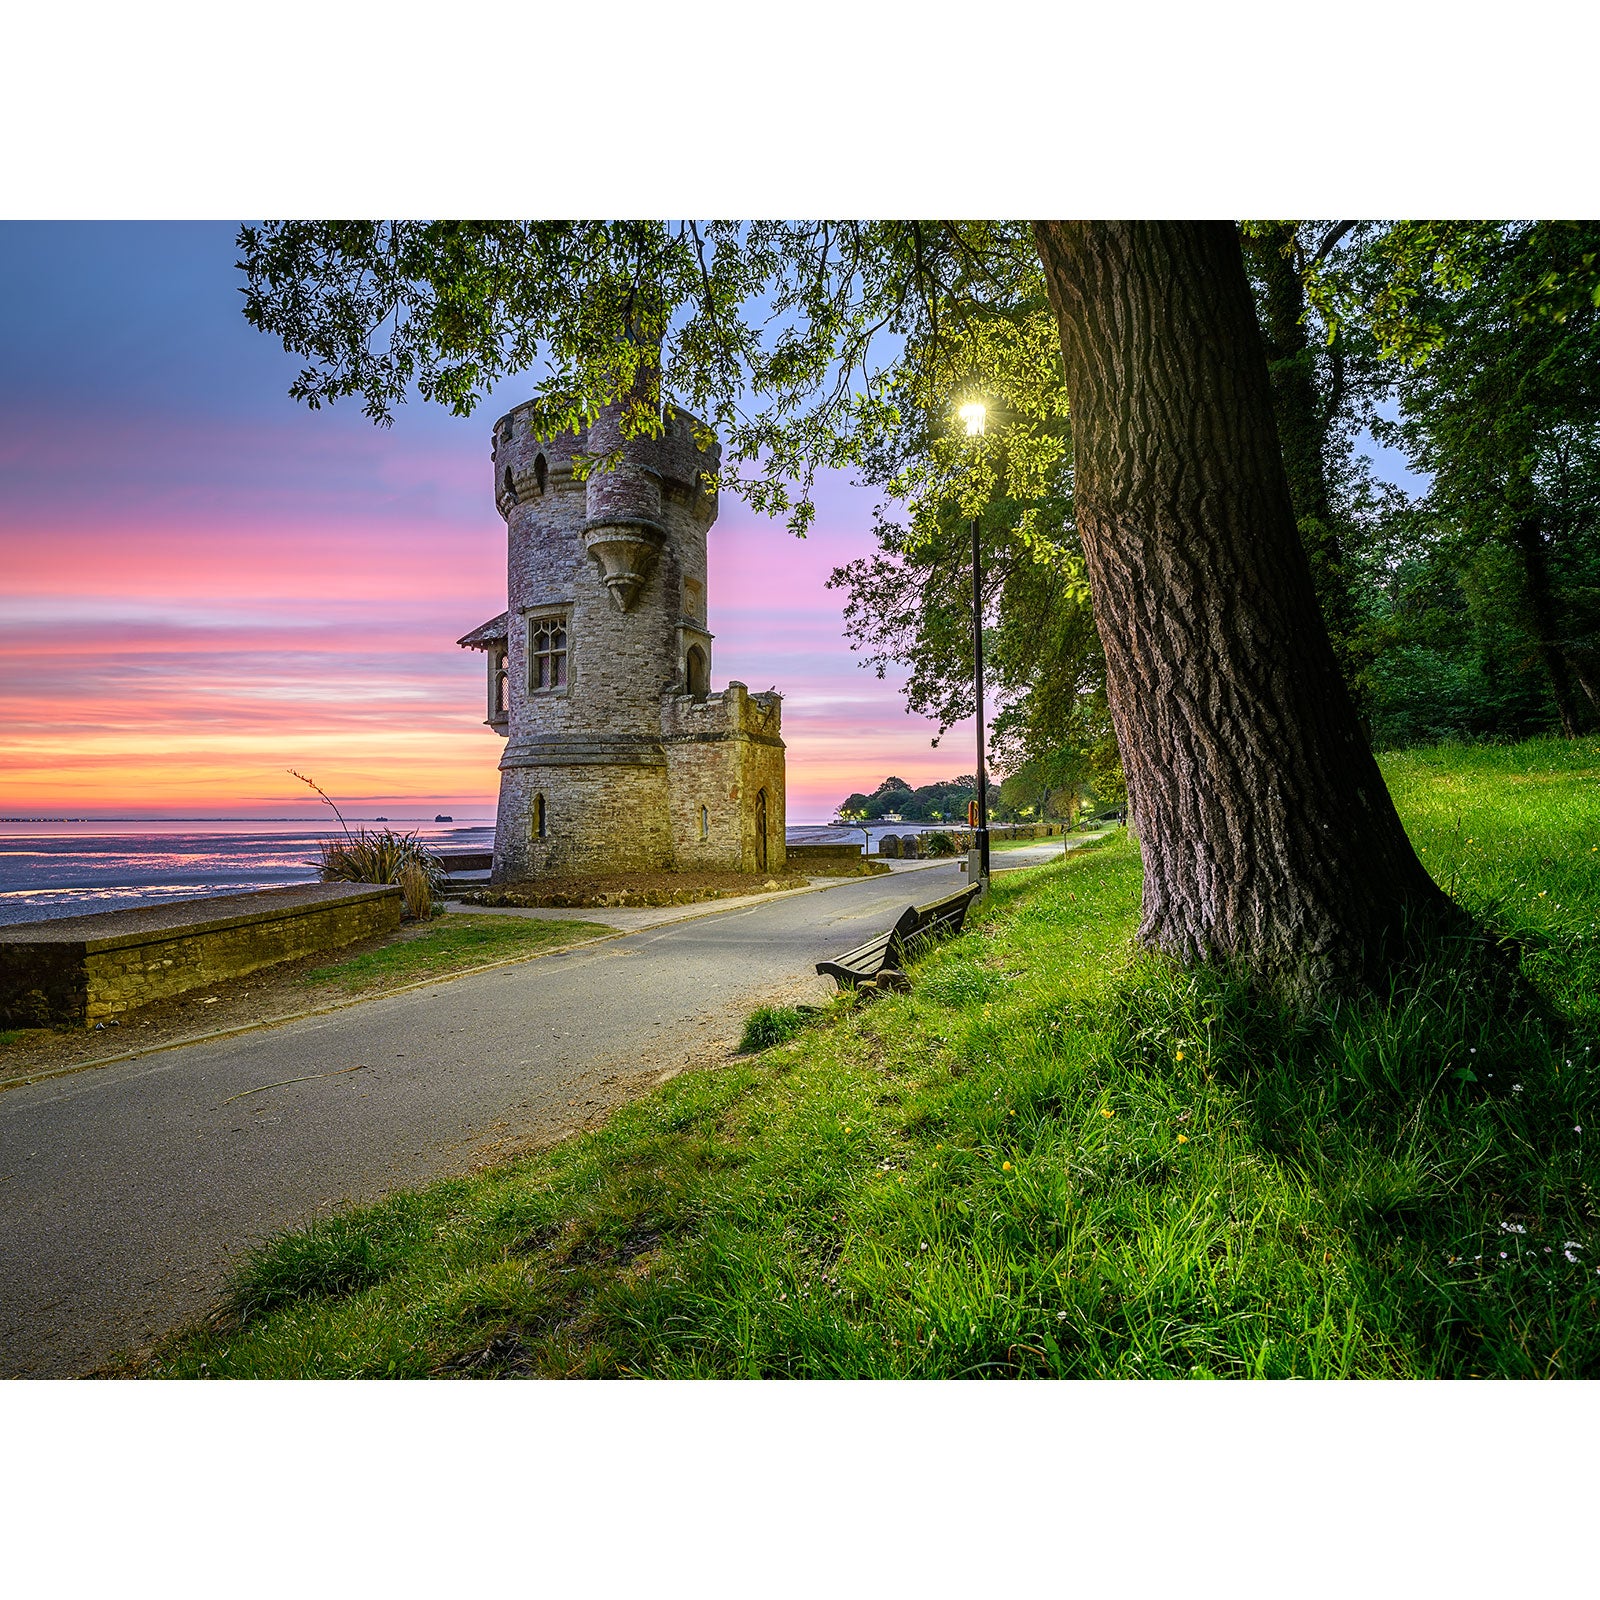 An old Appley Tower beside a path with a bench under a tree, illuminated by a street lamp at dusk with a colorful sky on the Isle. (Available Light Photography)